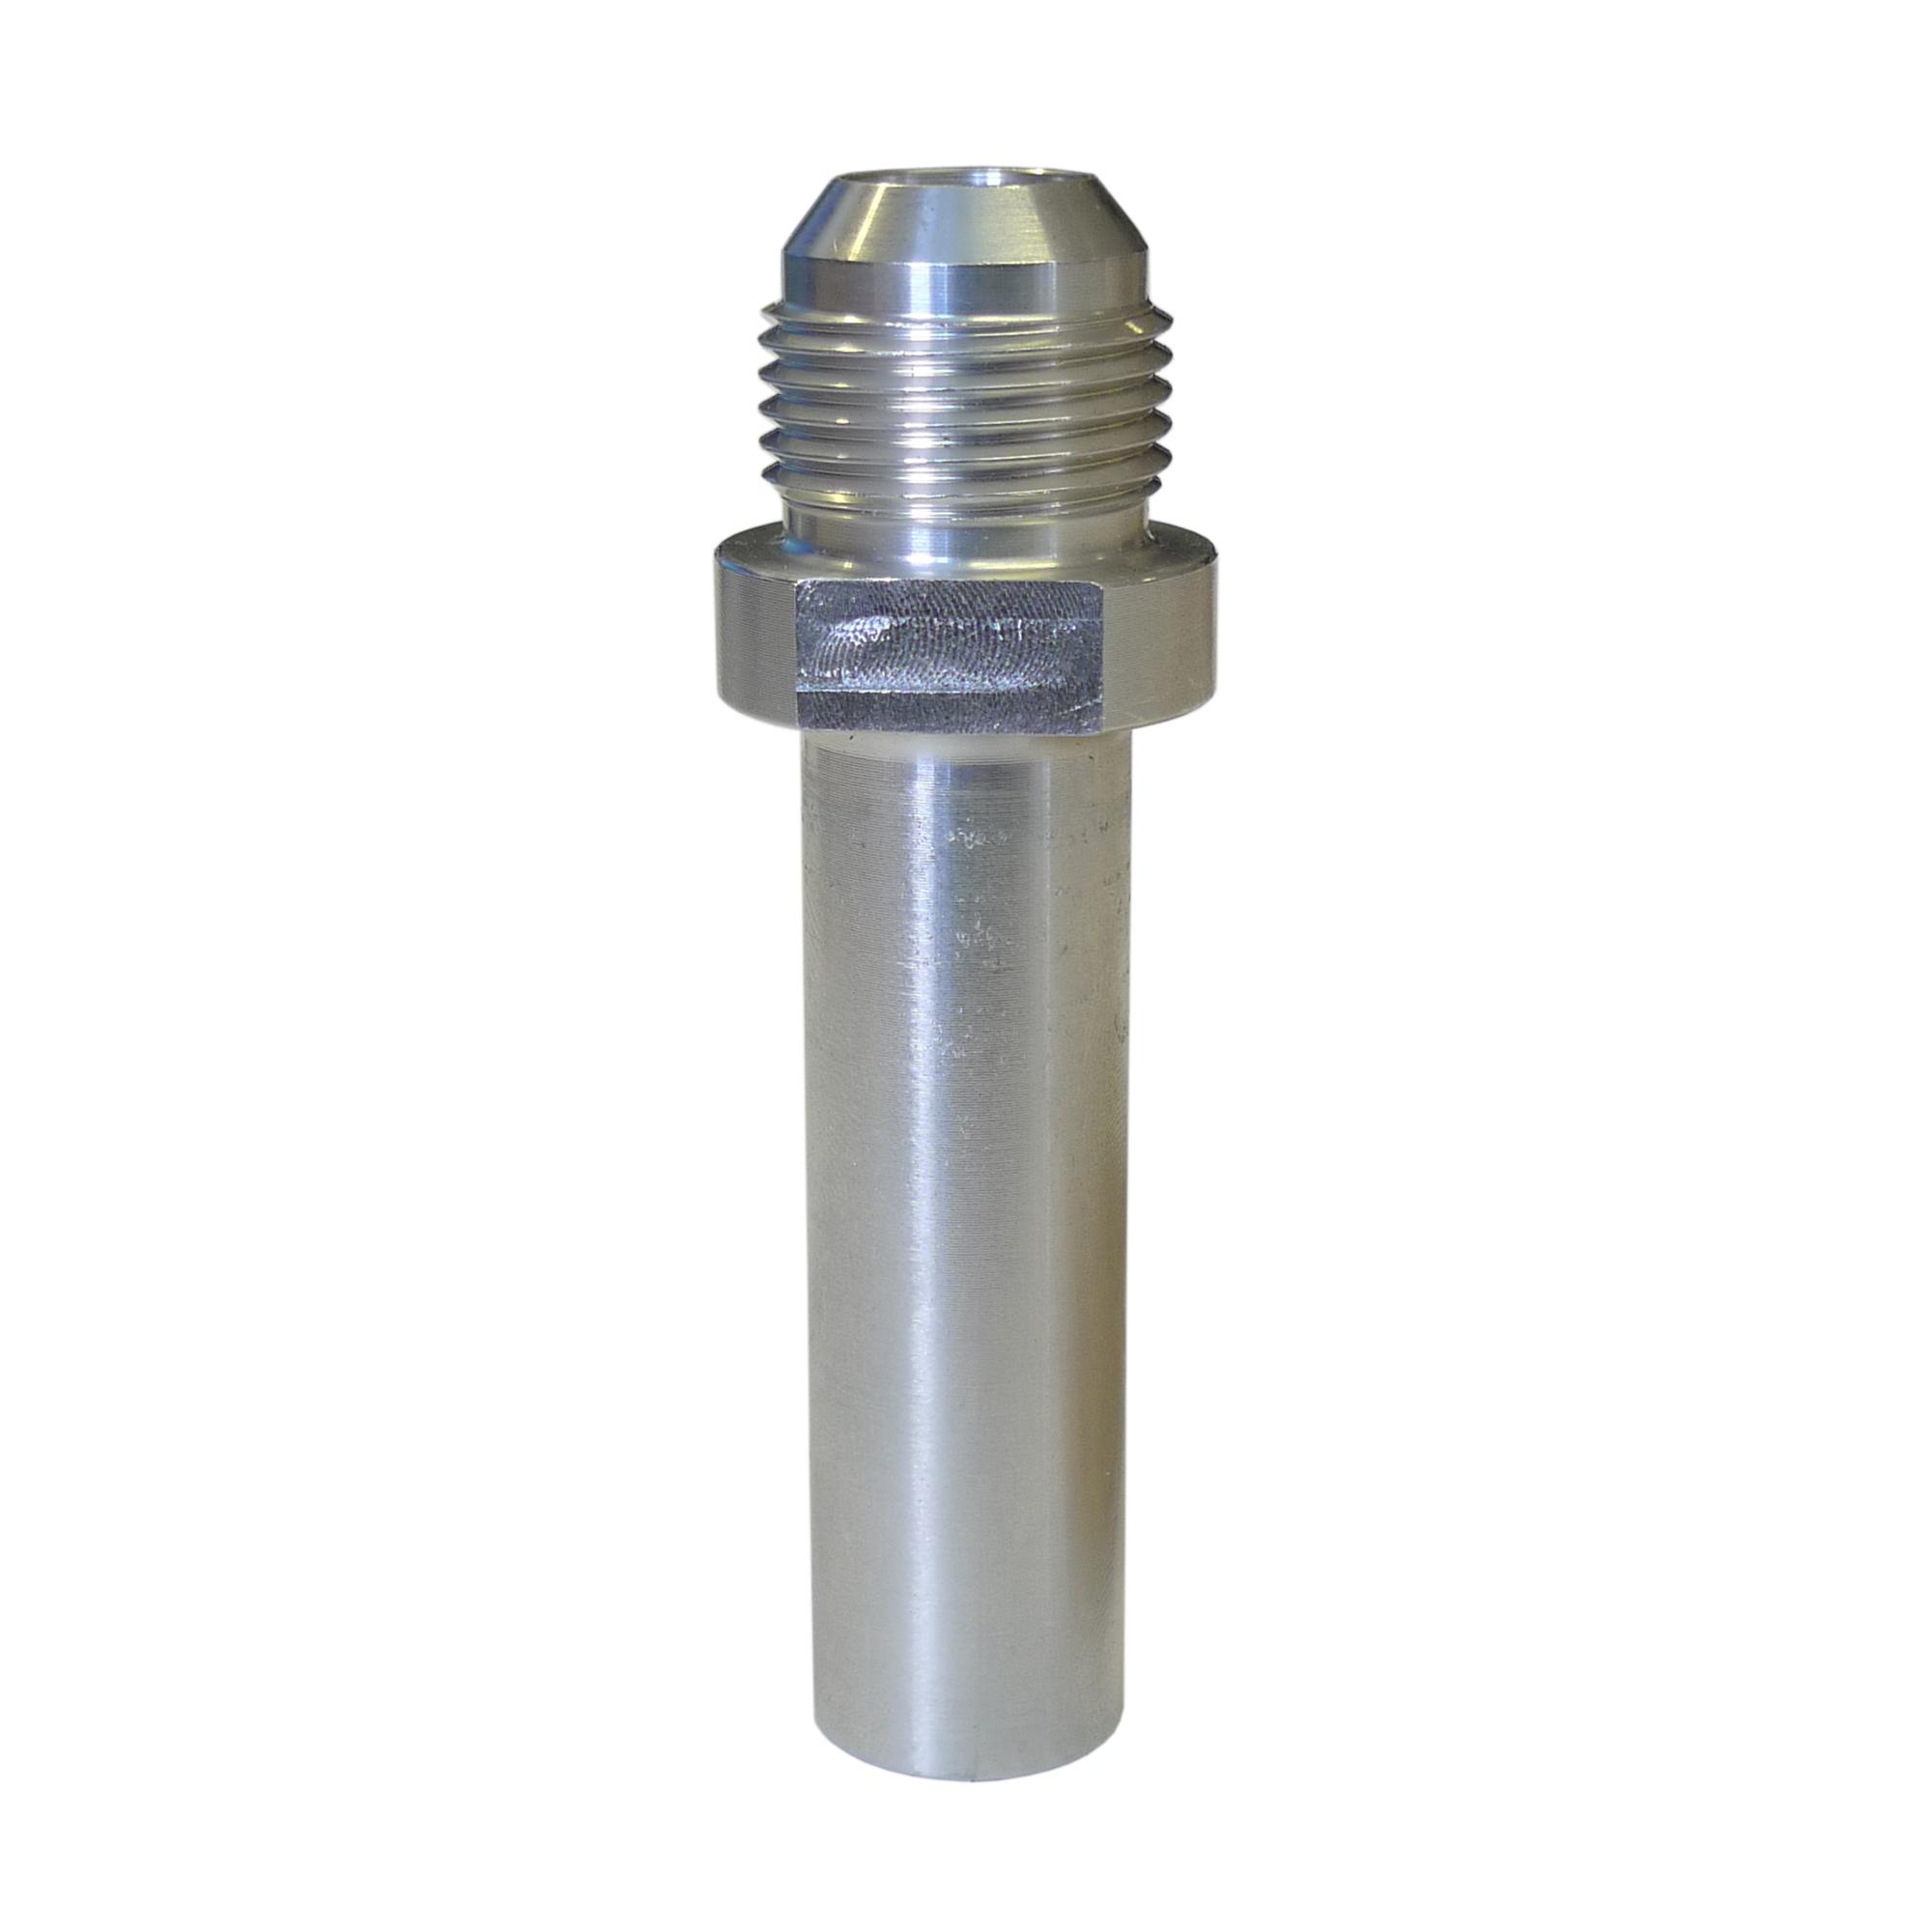 Weld On Alloy -10 JIC Male Fitting With Extended Stem